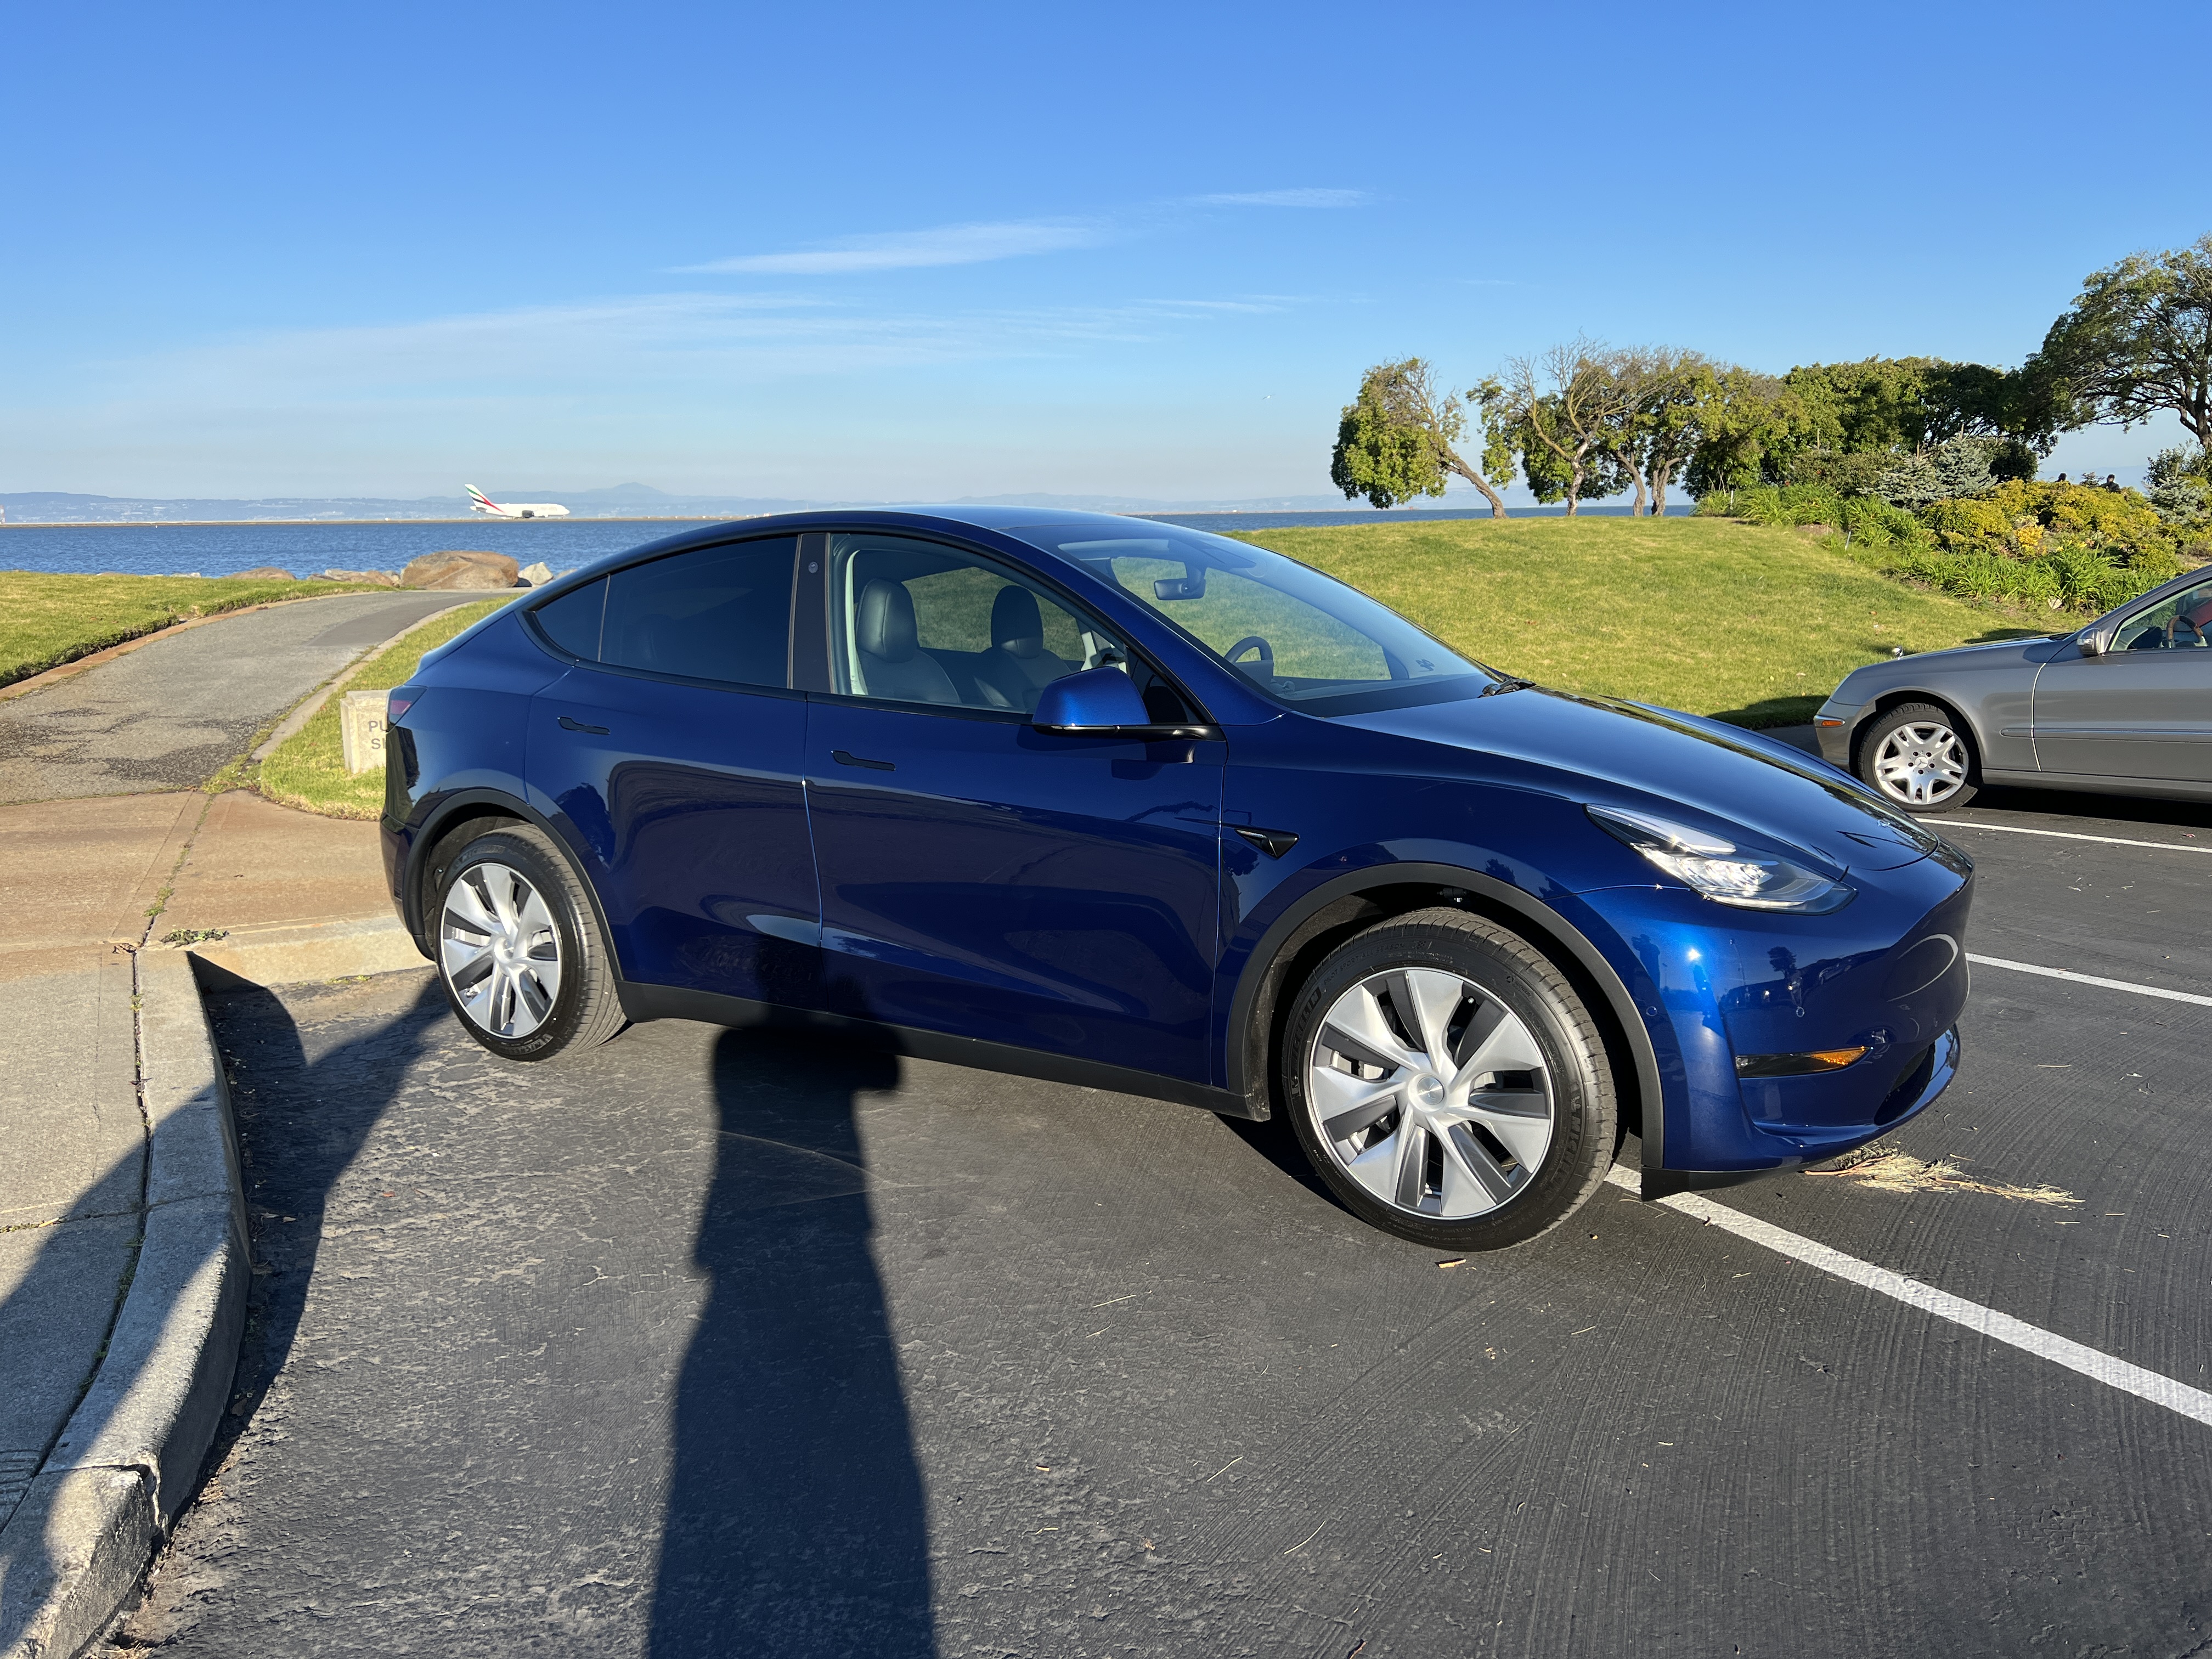 Used 2021 Tesla Model Y for Sale (Test Drive at Home) - Kelley Blue Book